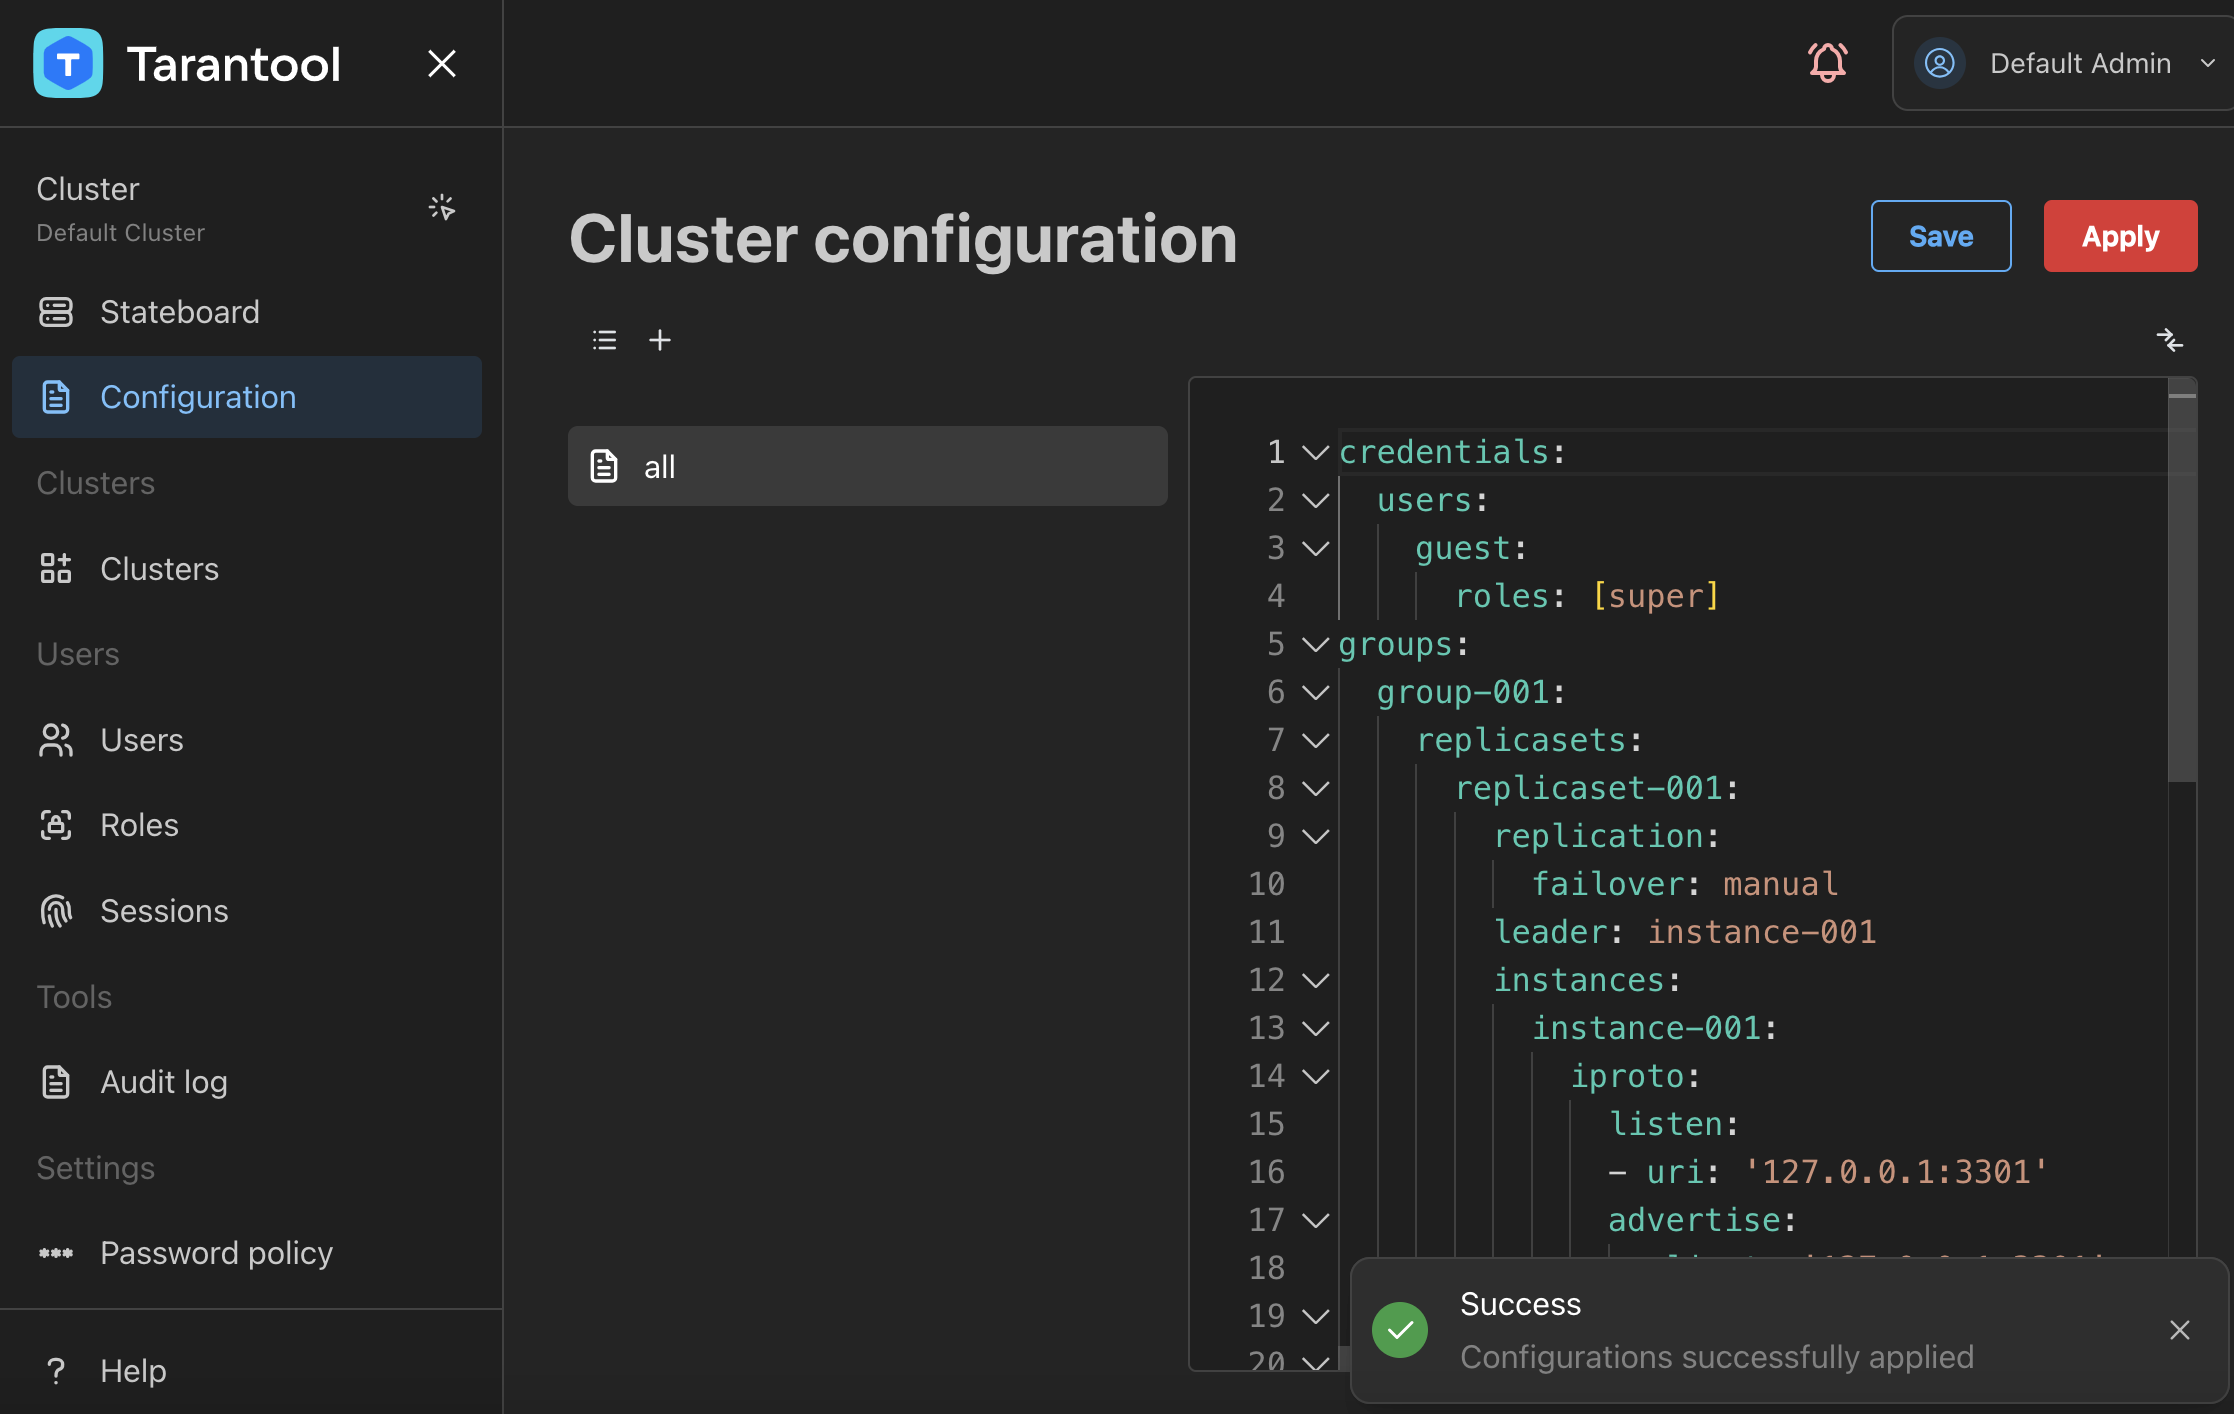 Cluster configuration in TCM